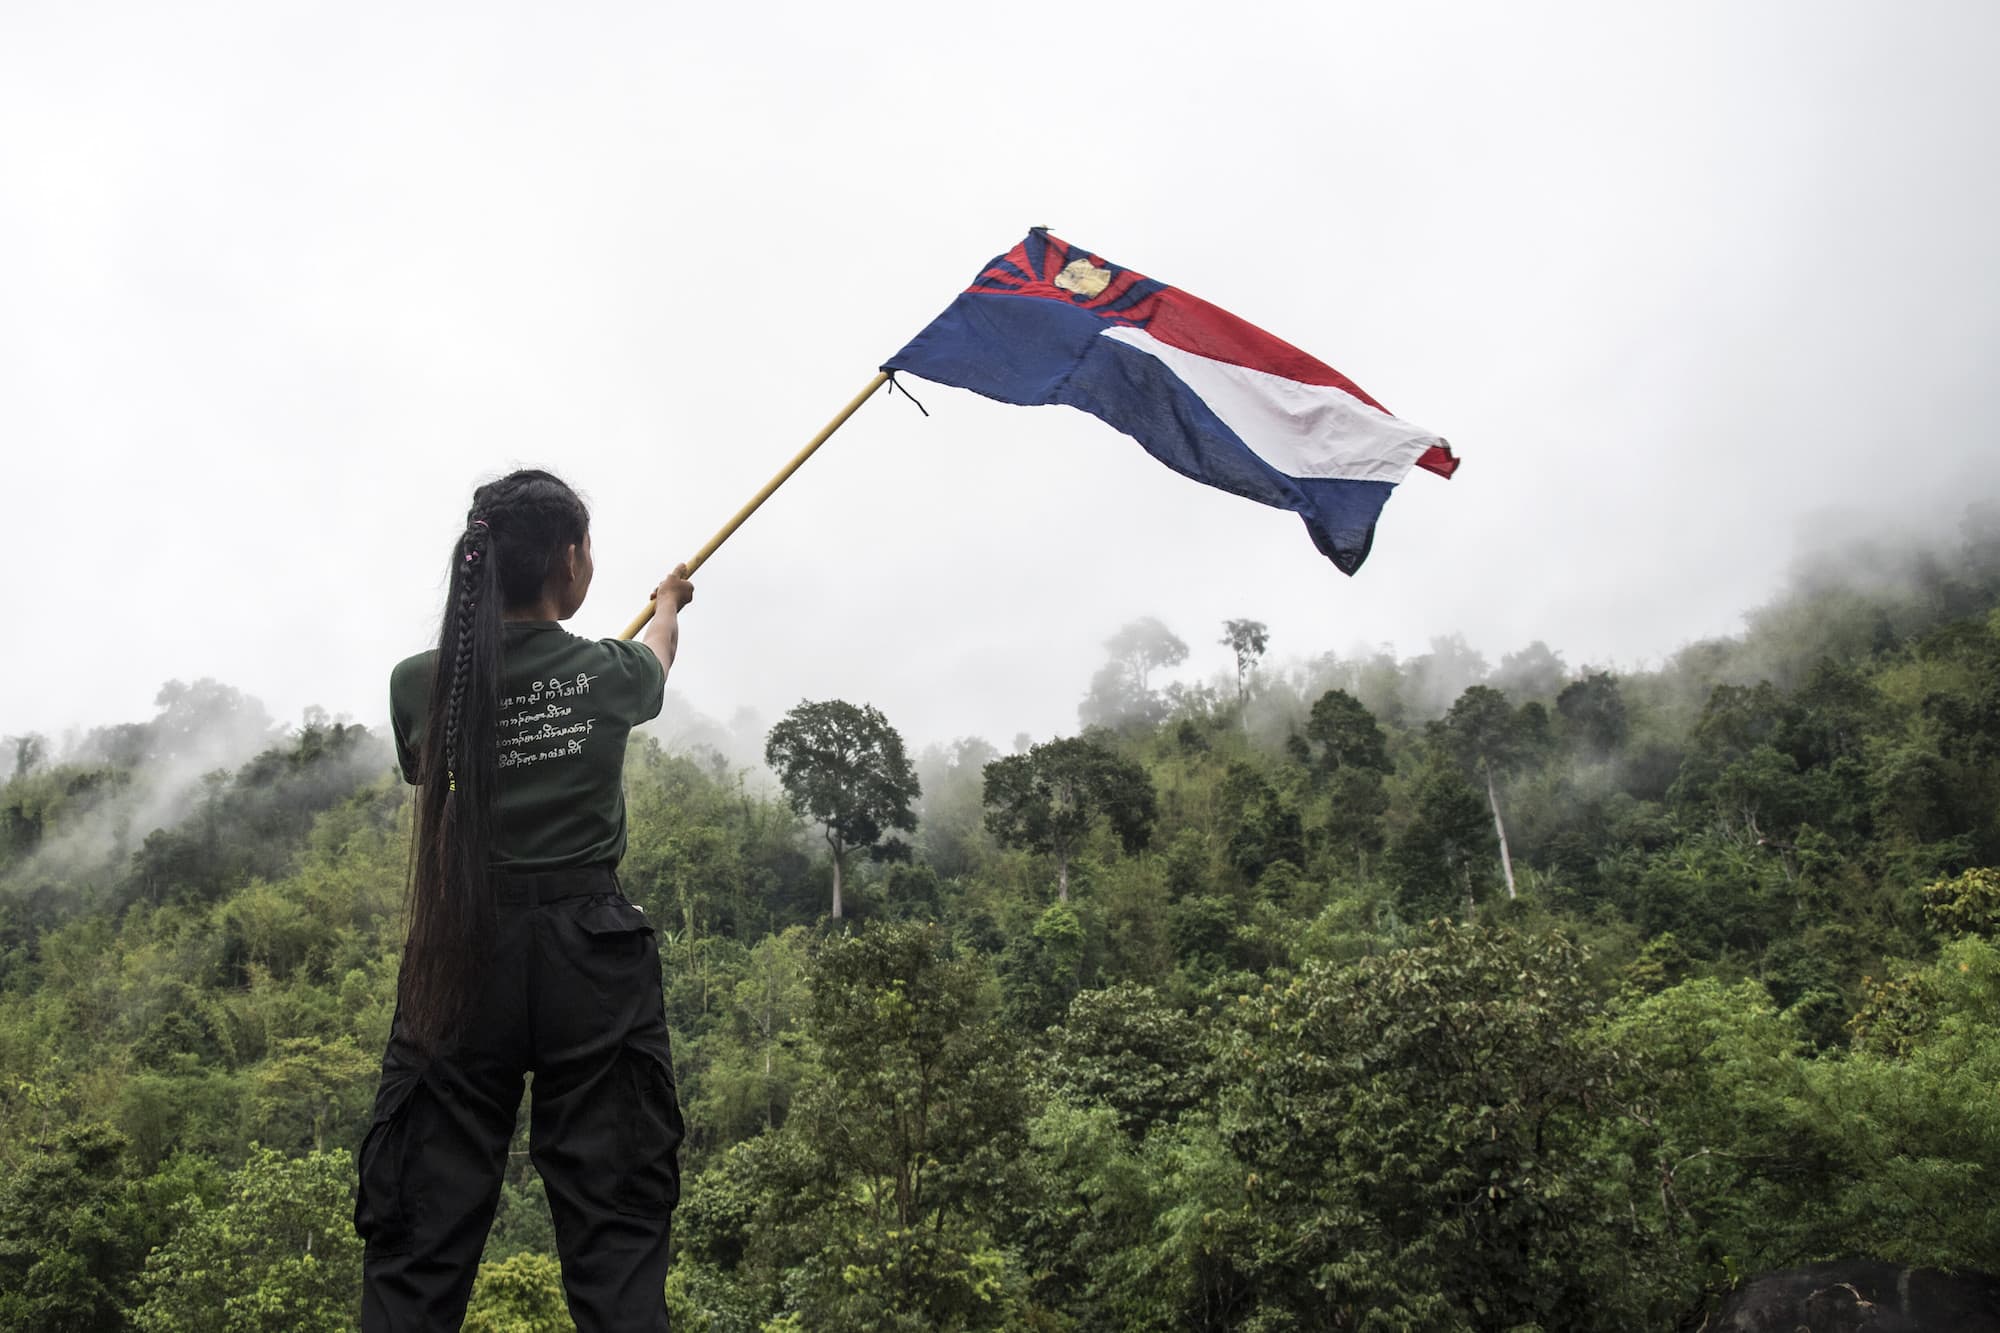 A young woman undergoing military training waves the flag of the Karen National Union (KNU) in Hpapun Township, Myanmar.